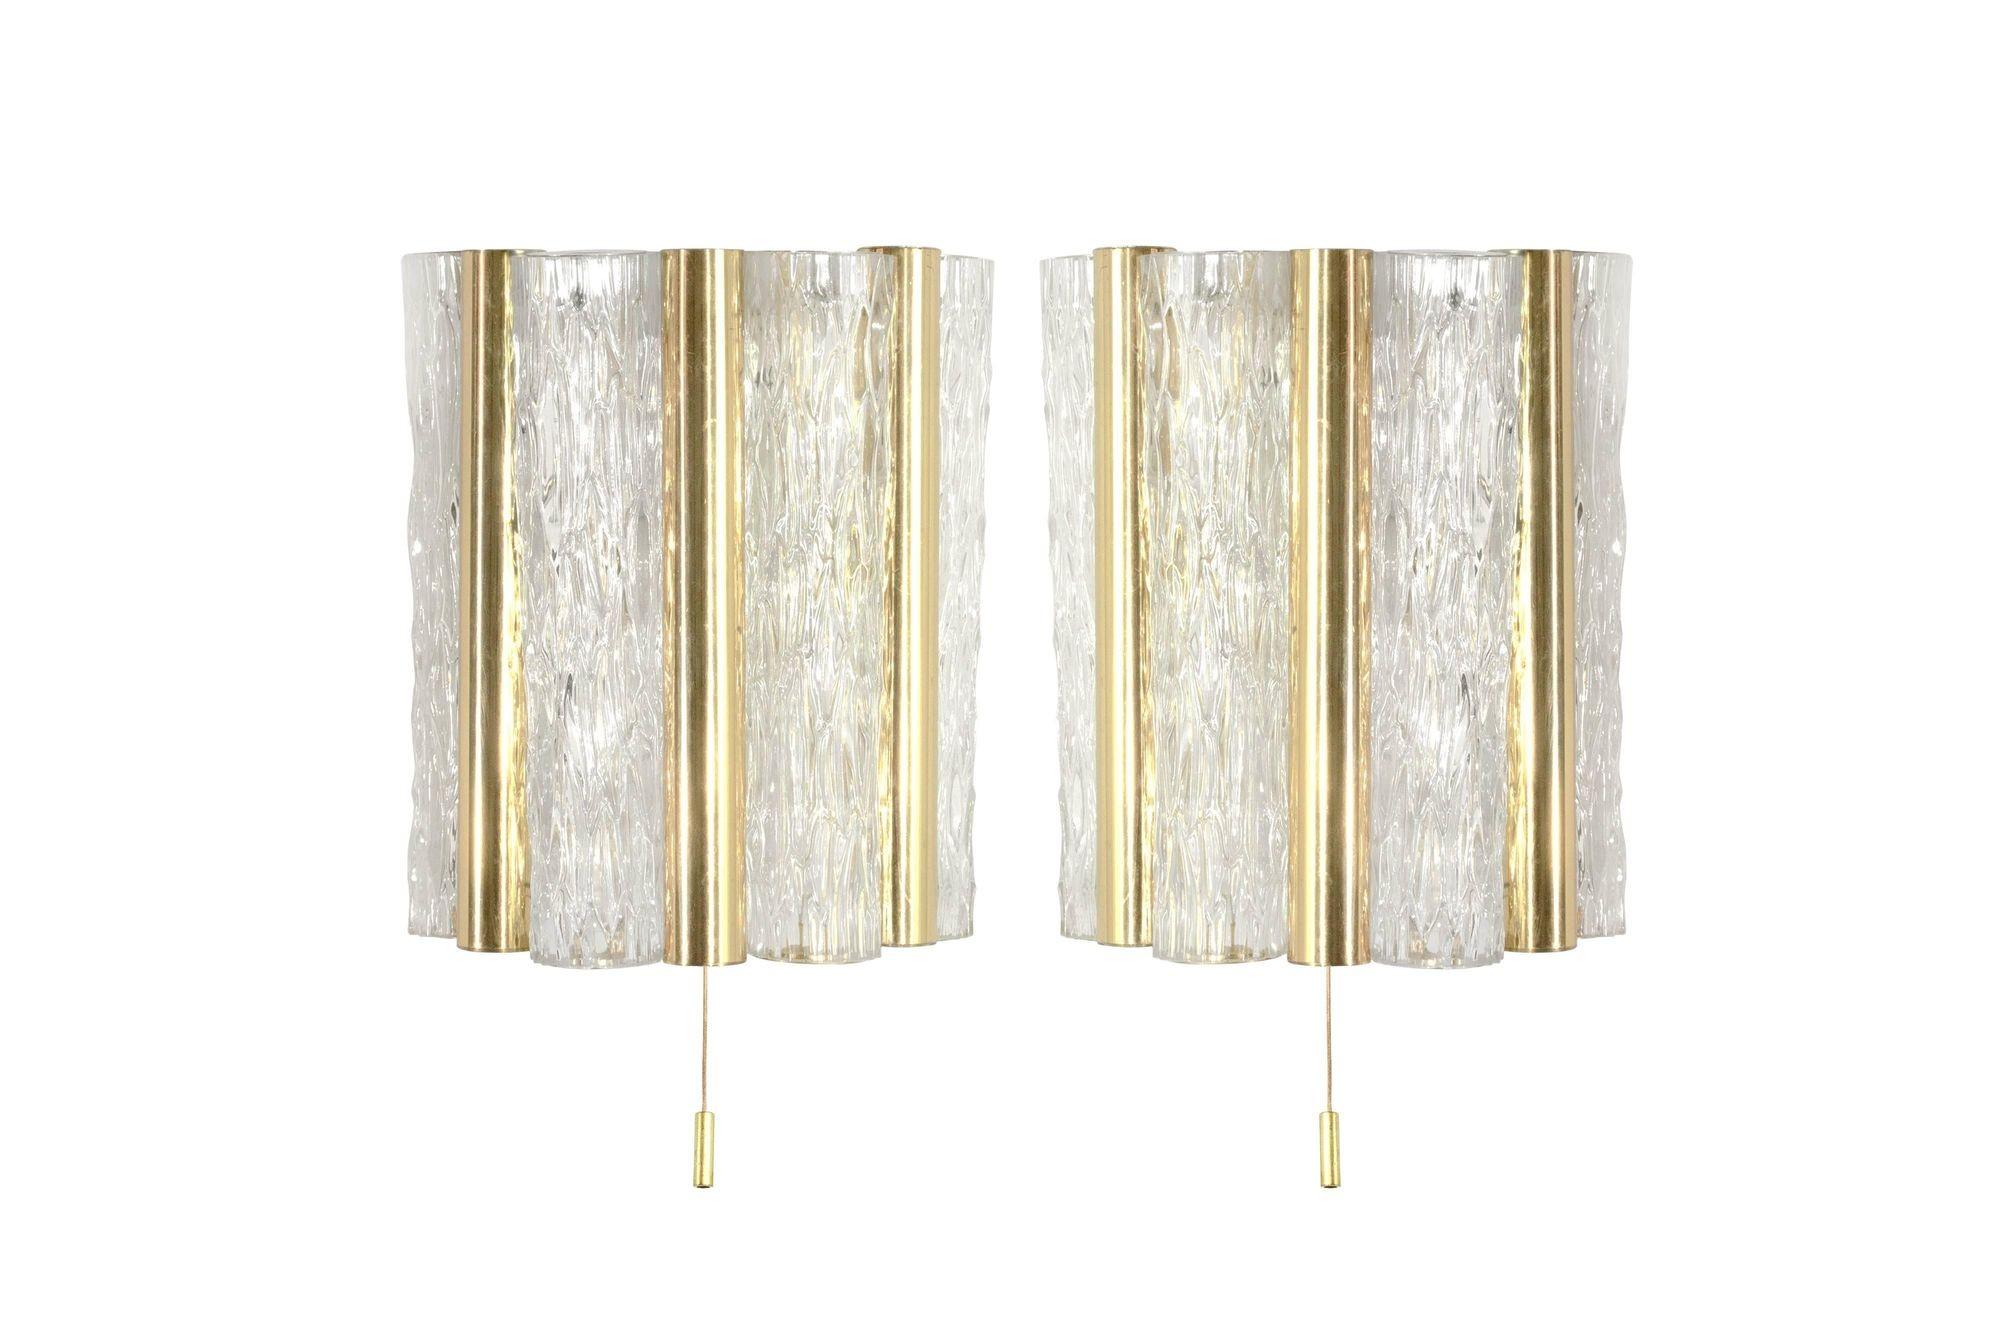 Meticulously restored Murano Glass and Brass Sconces by Doria Leuchten, crafted in Germany circa the 1960s. These elegant pieces showcase the epitome of mid-century modern design, marrying exquisite Murano glass craftsmanship with refined brass